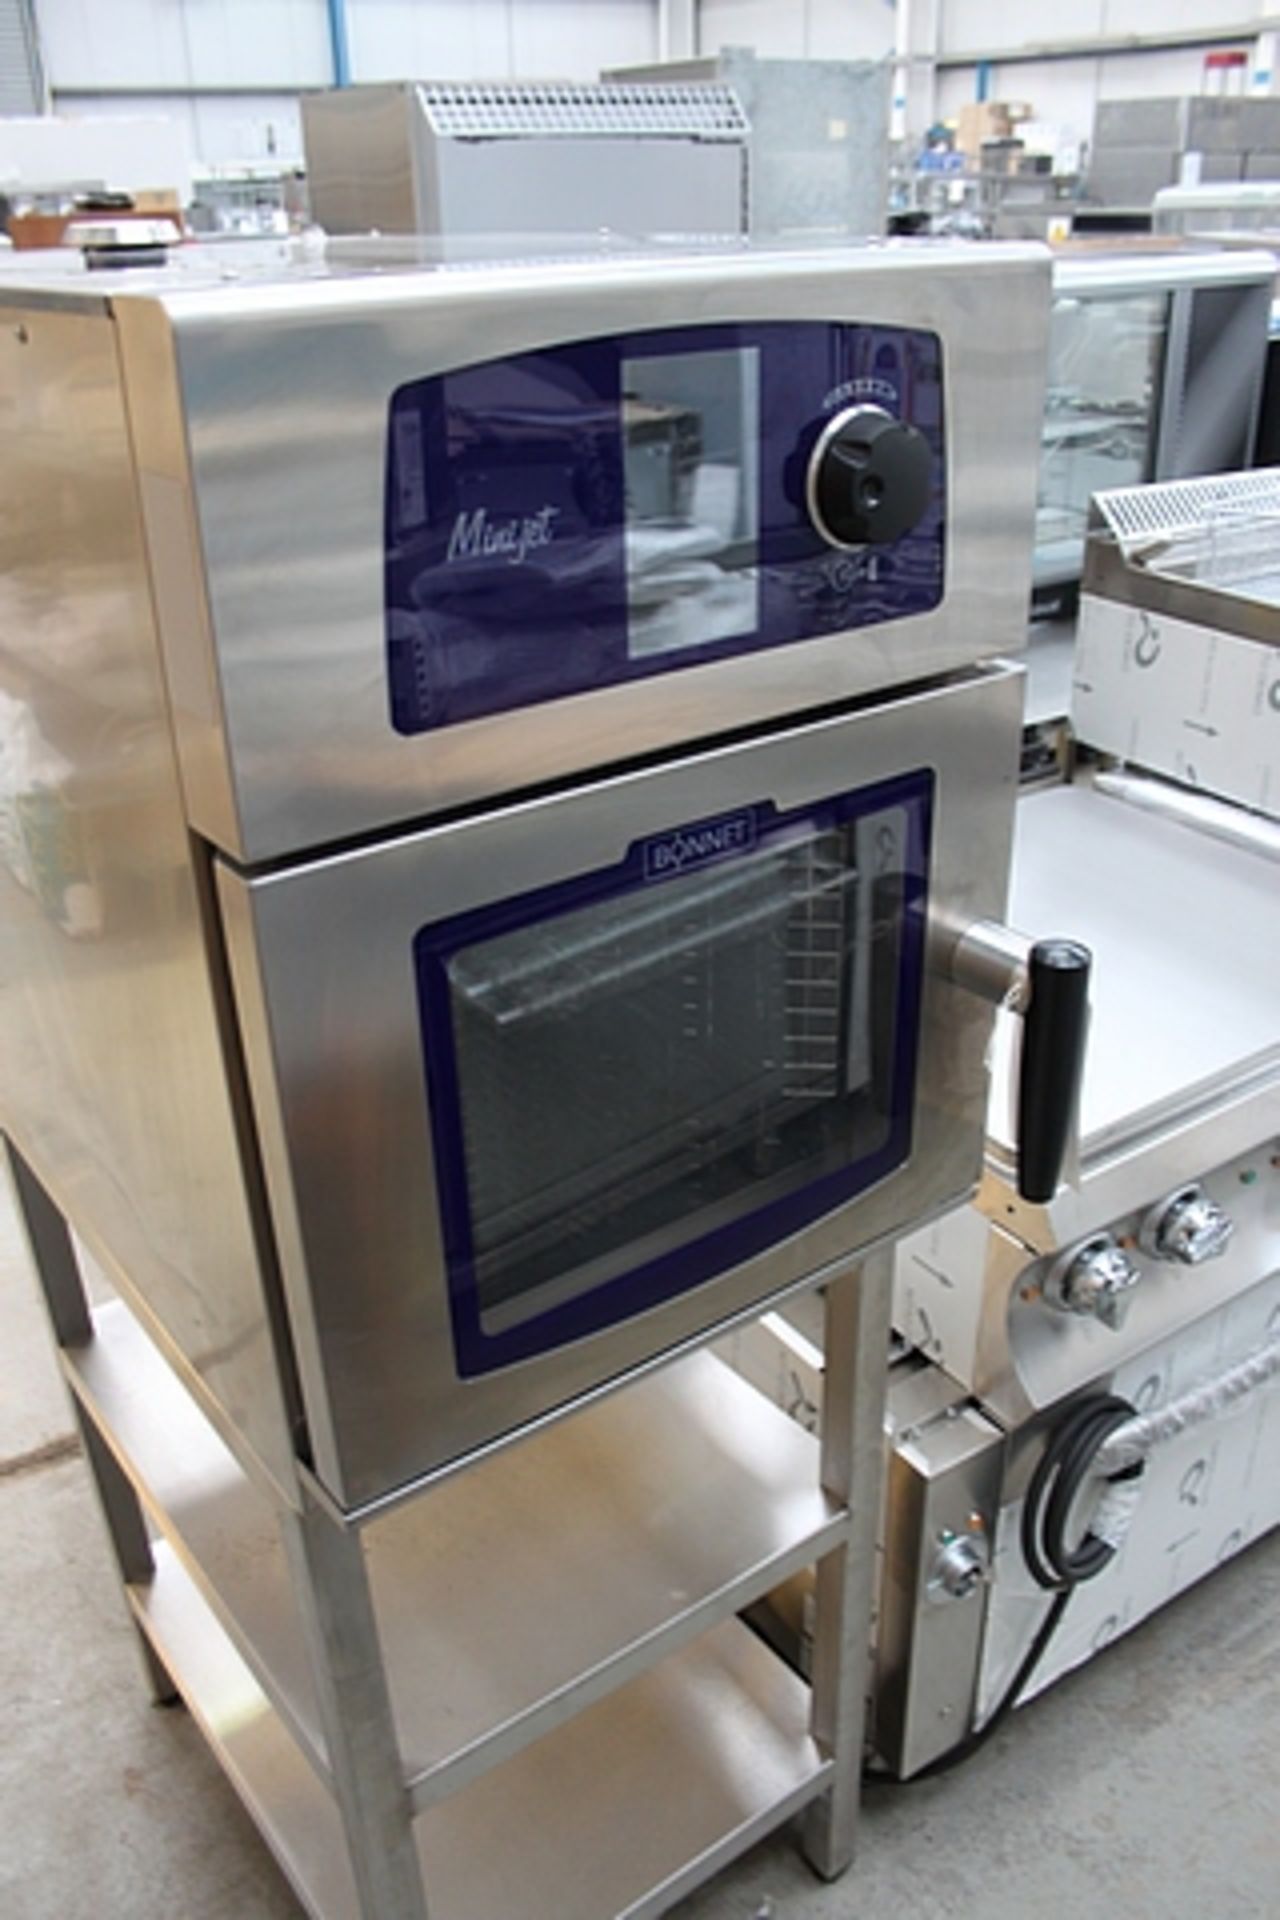 Bonnet Minijet B1MJ061E-40 6.3kW 3phase electric 6 level GN 1/1 electric oven VisioPAD® toughened - Image 2 of 3